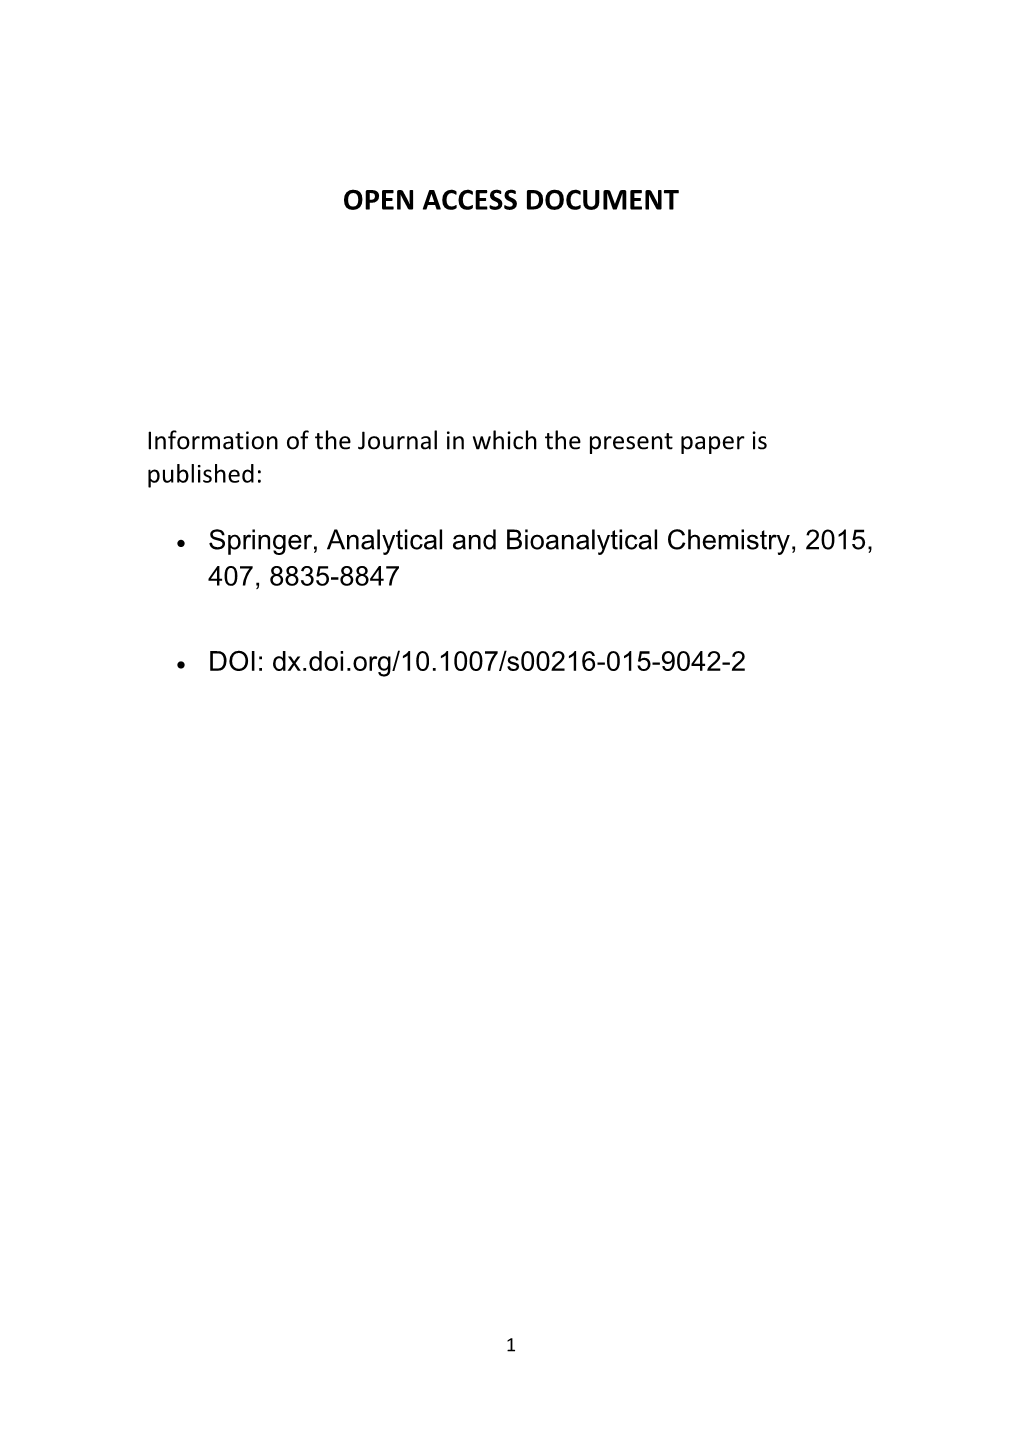 Information of the Journal in Which the Present Paper Is Published